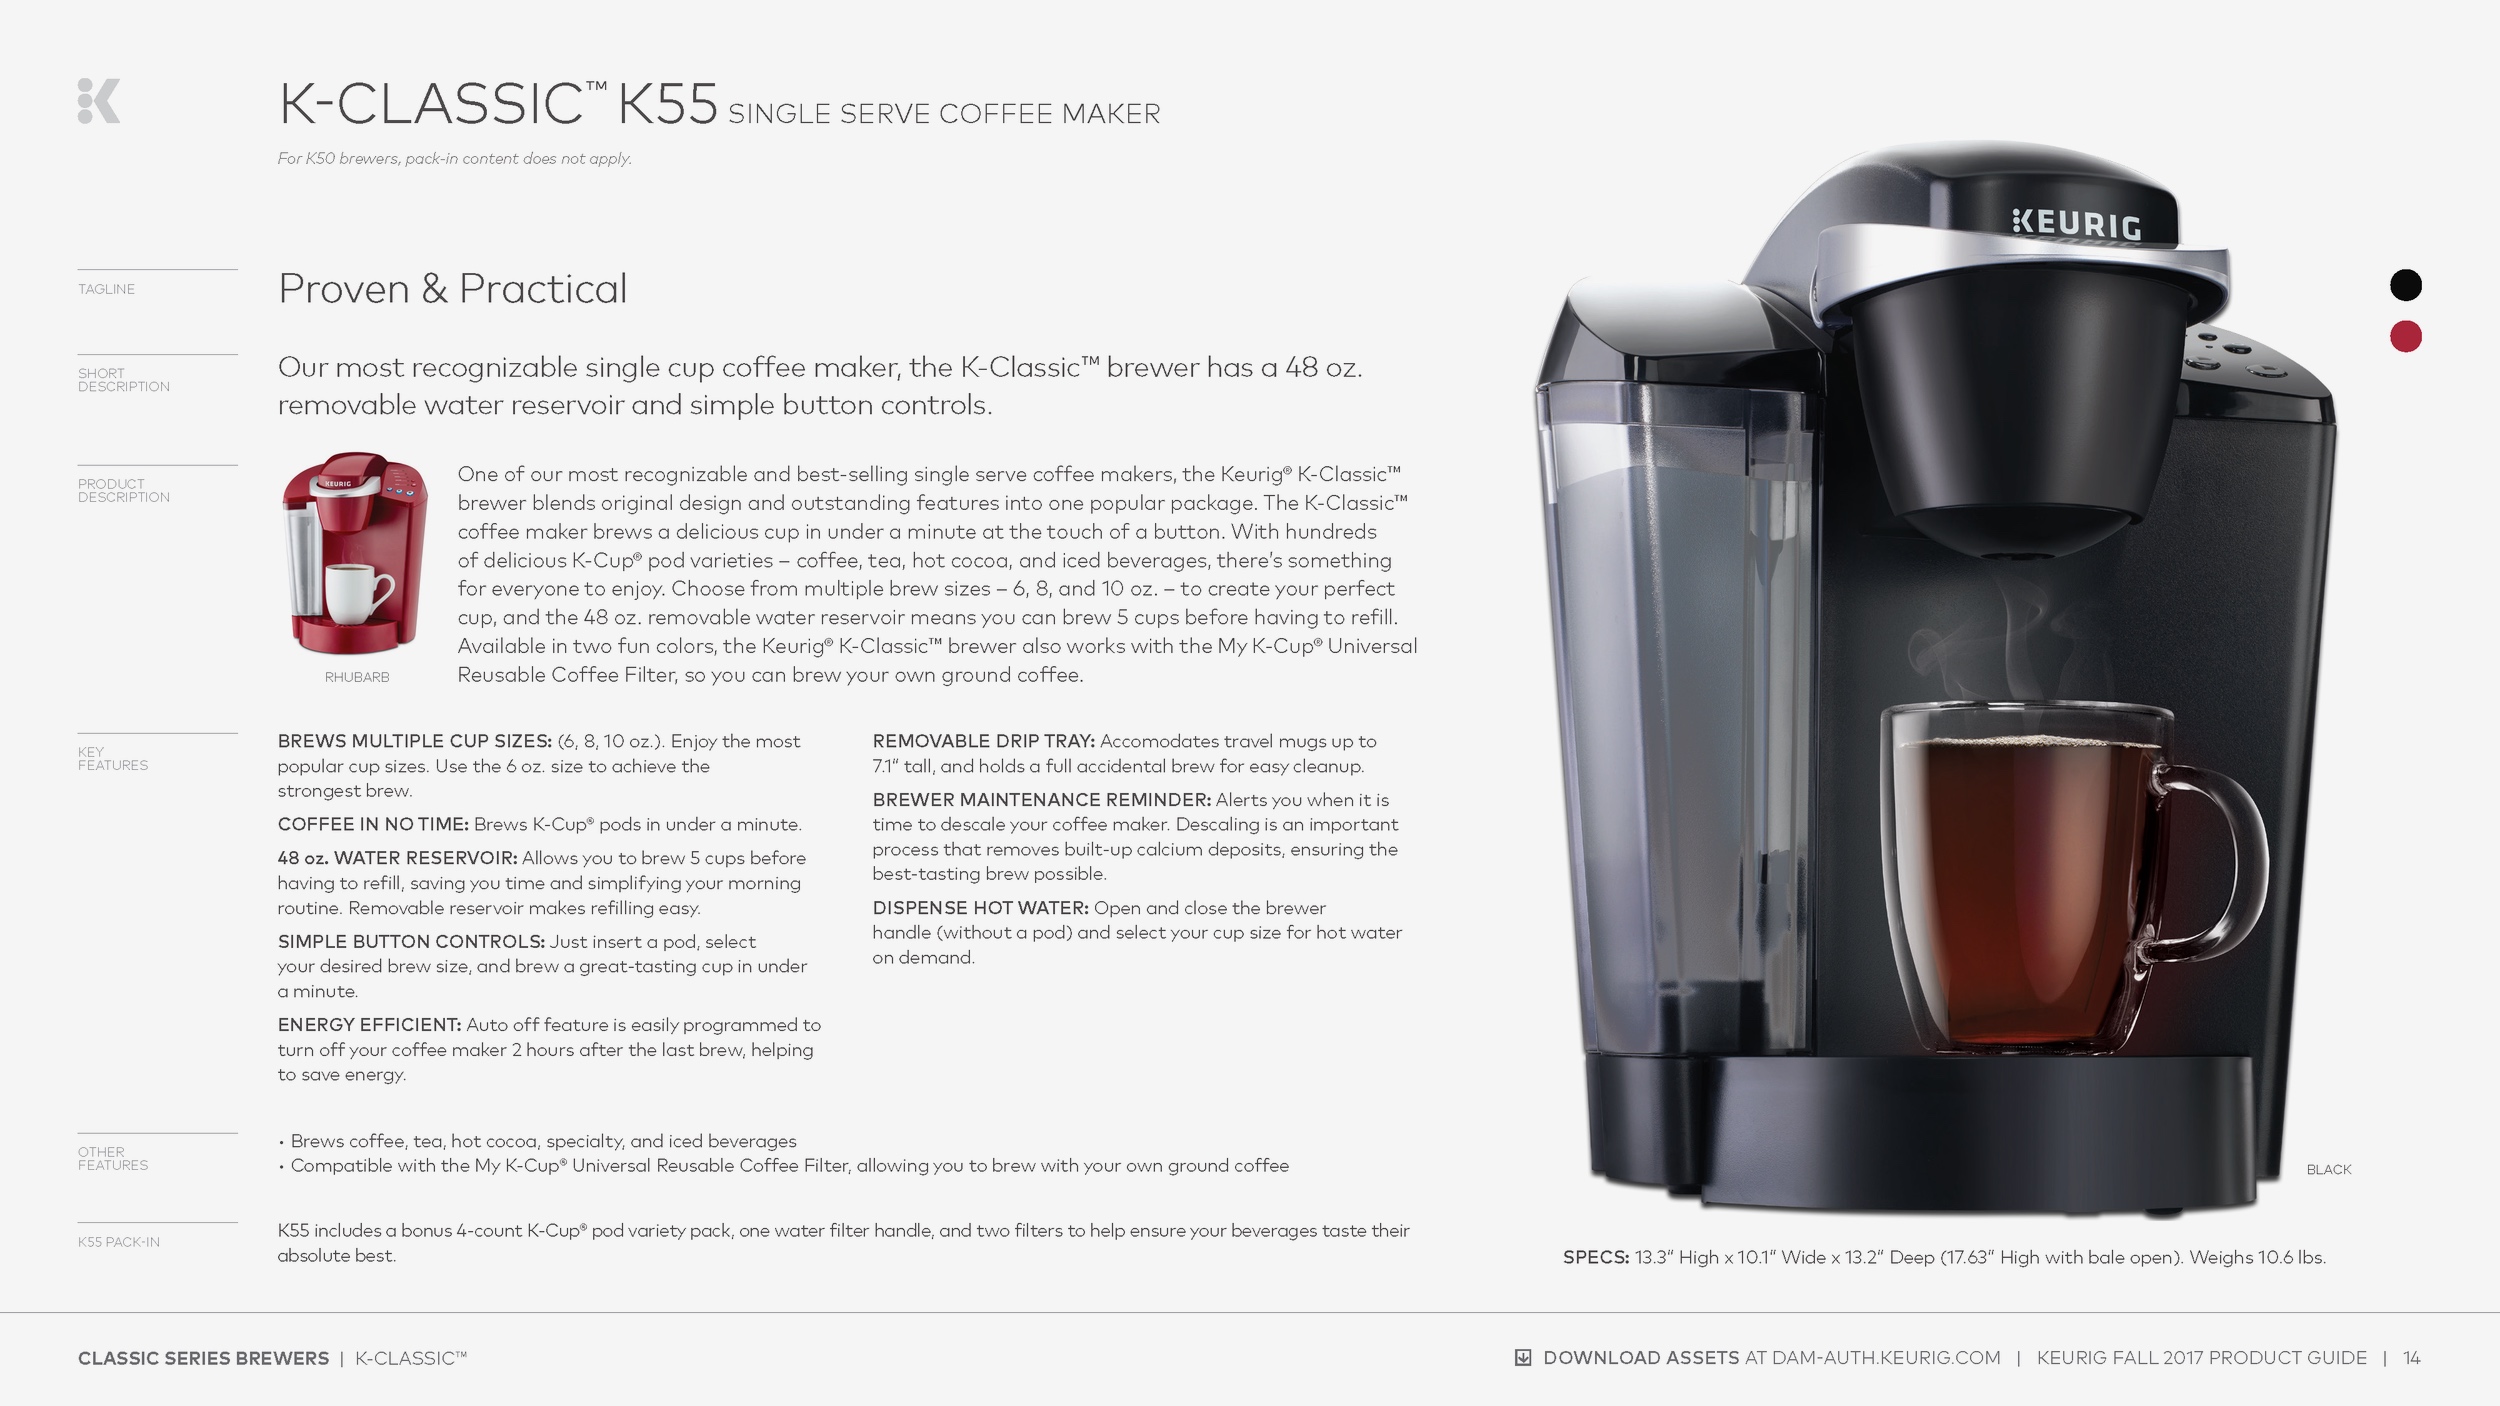 keurig_product_guide_F17_R8_Page_14.png